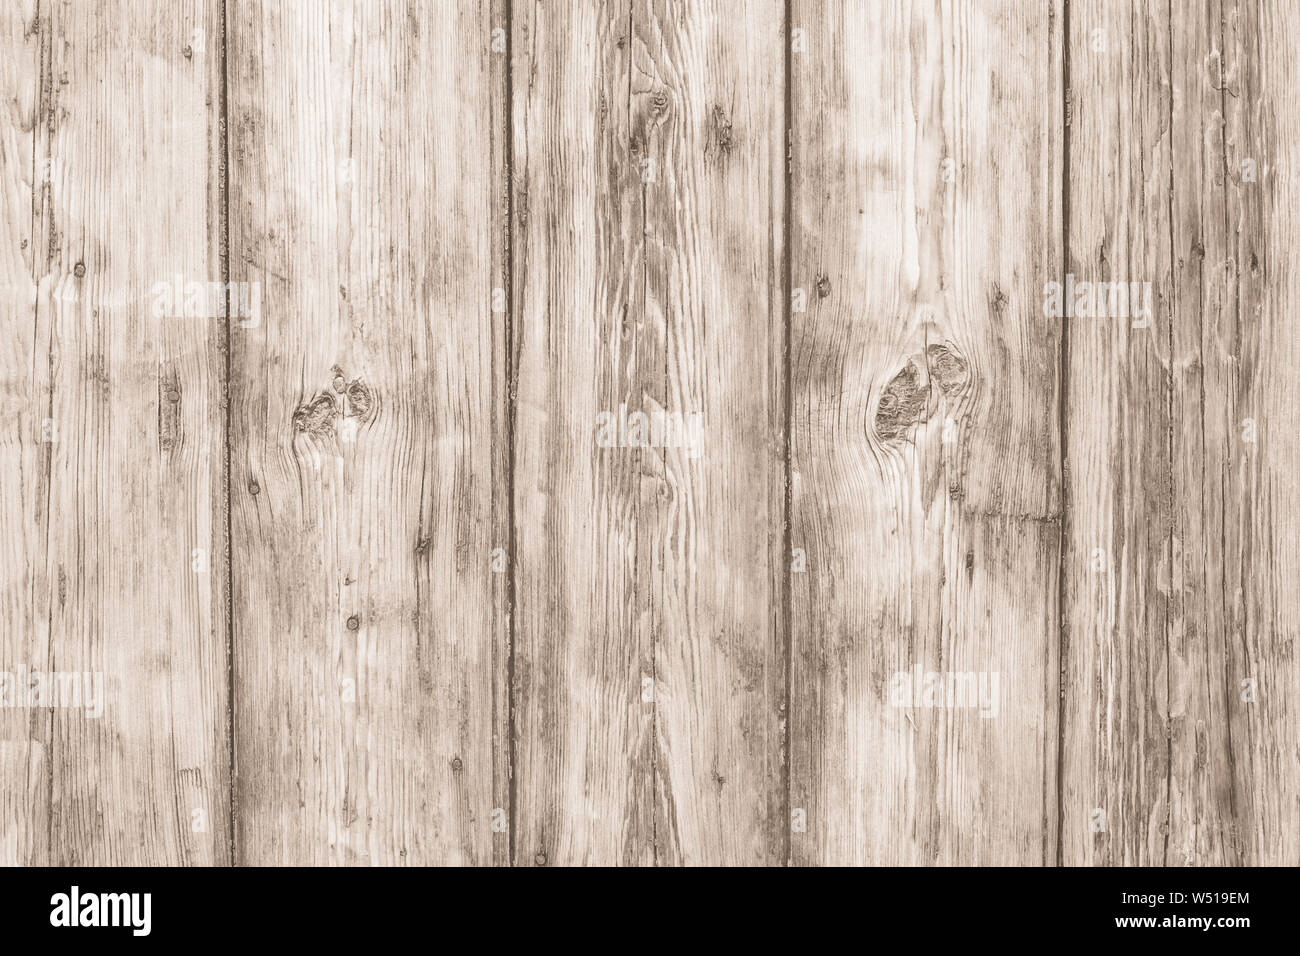 Light wooden desk. Oak fence texture. Old wood brown background. Hardwood  timber pattern. Dirty rustic striped frame with copy space. Vintage natural  Stock Photo - Alamy